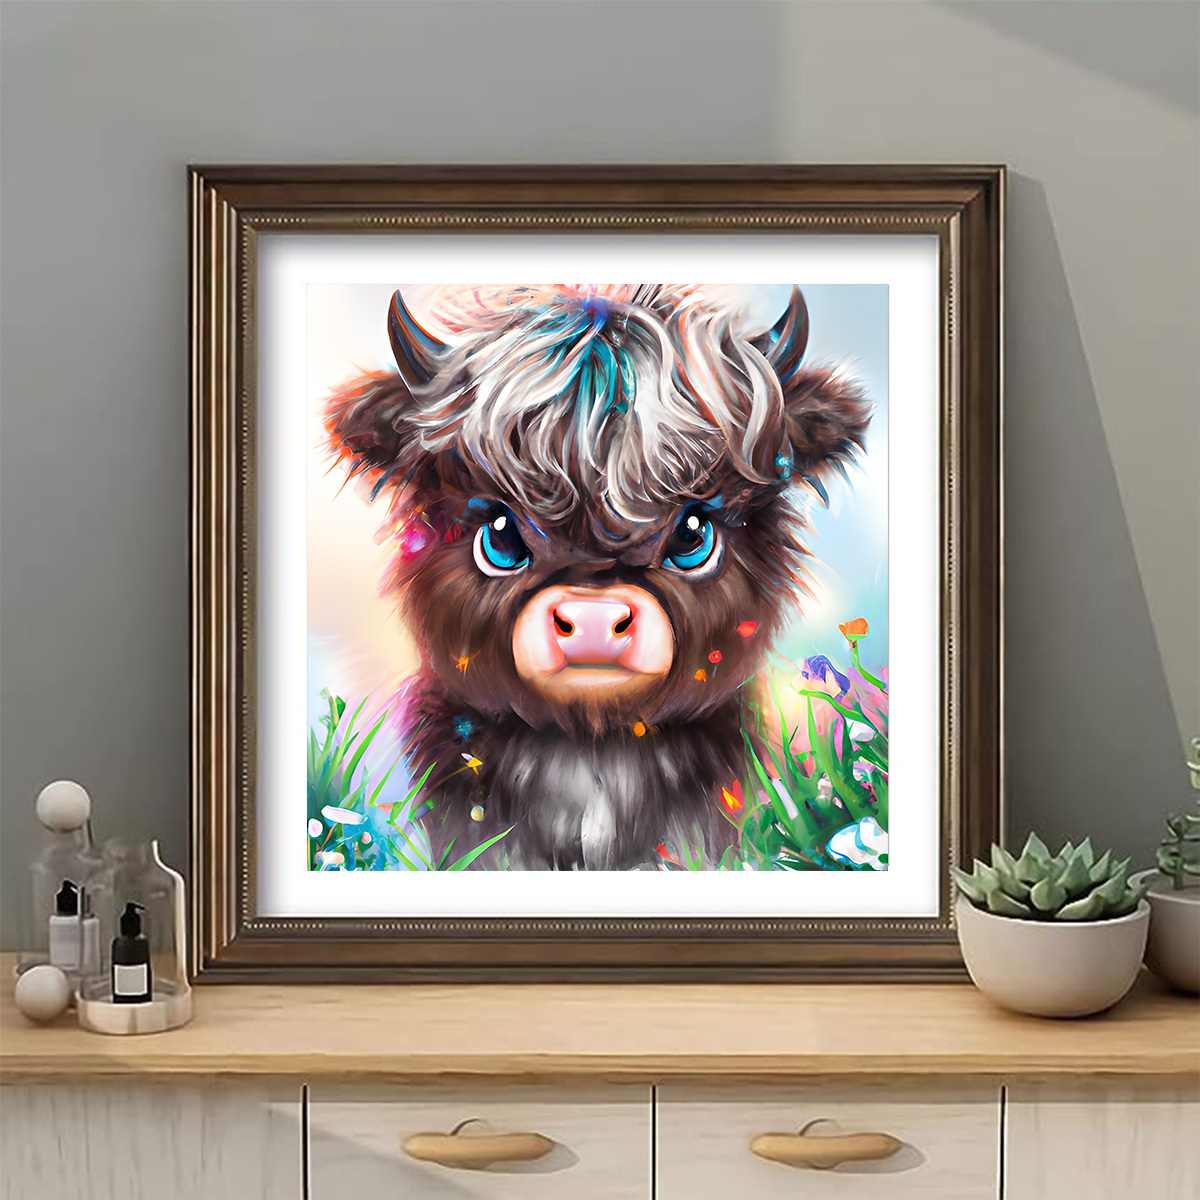 CoHraeu Diamond Painting Kits-Cow Diamond Art for Adults Kids Beginners,5D  Diamond Painting for Gift Home Wall Decoe 18x25 inch